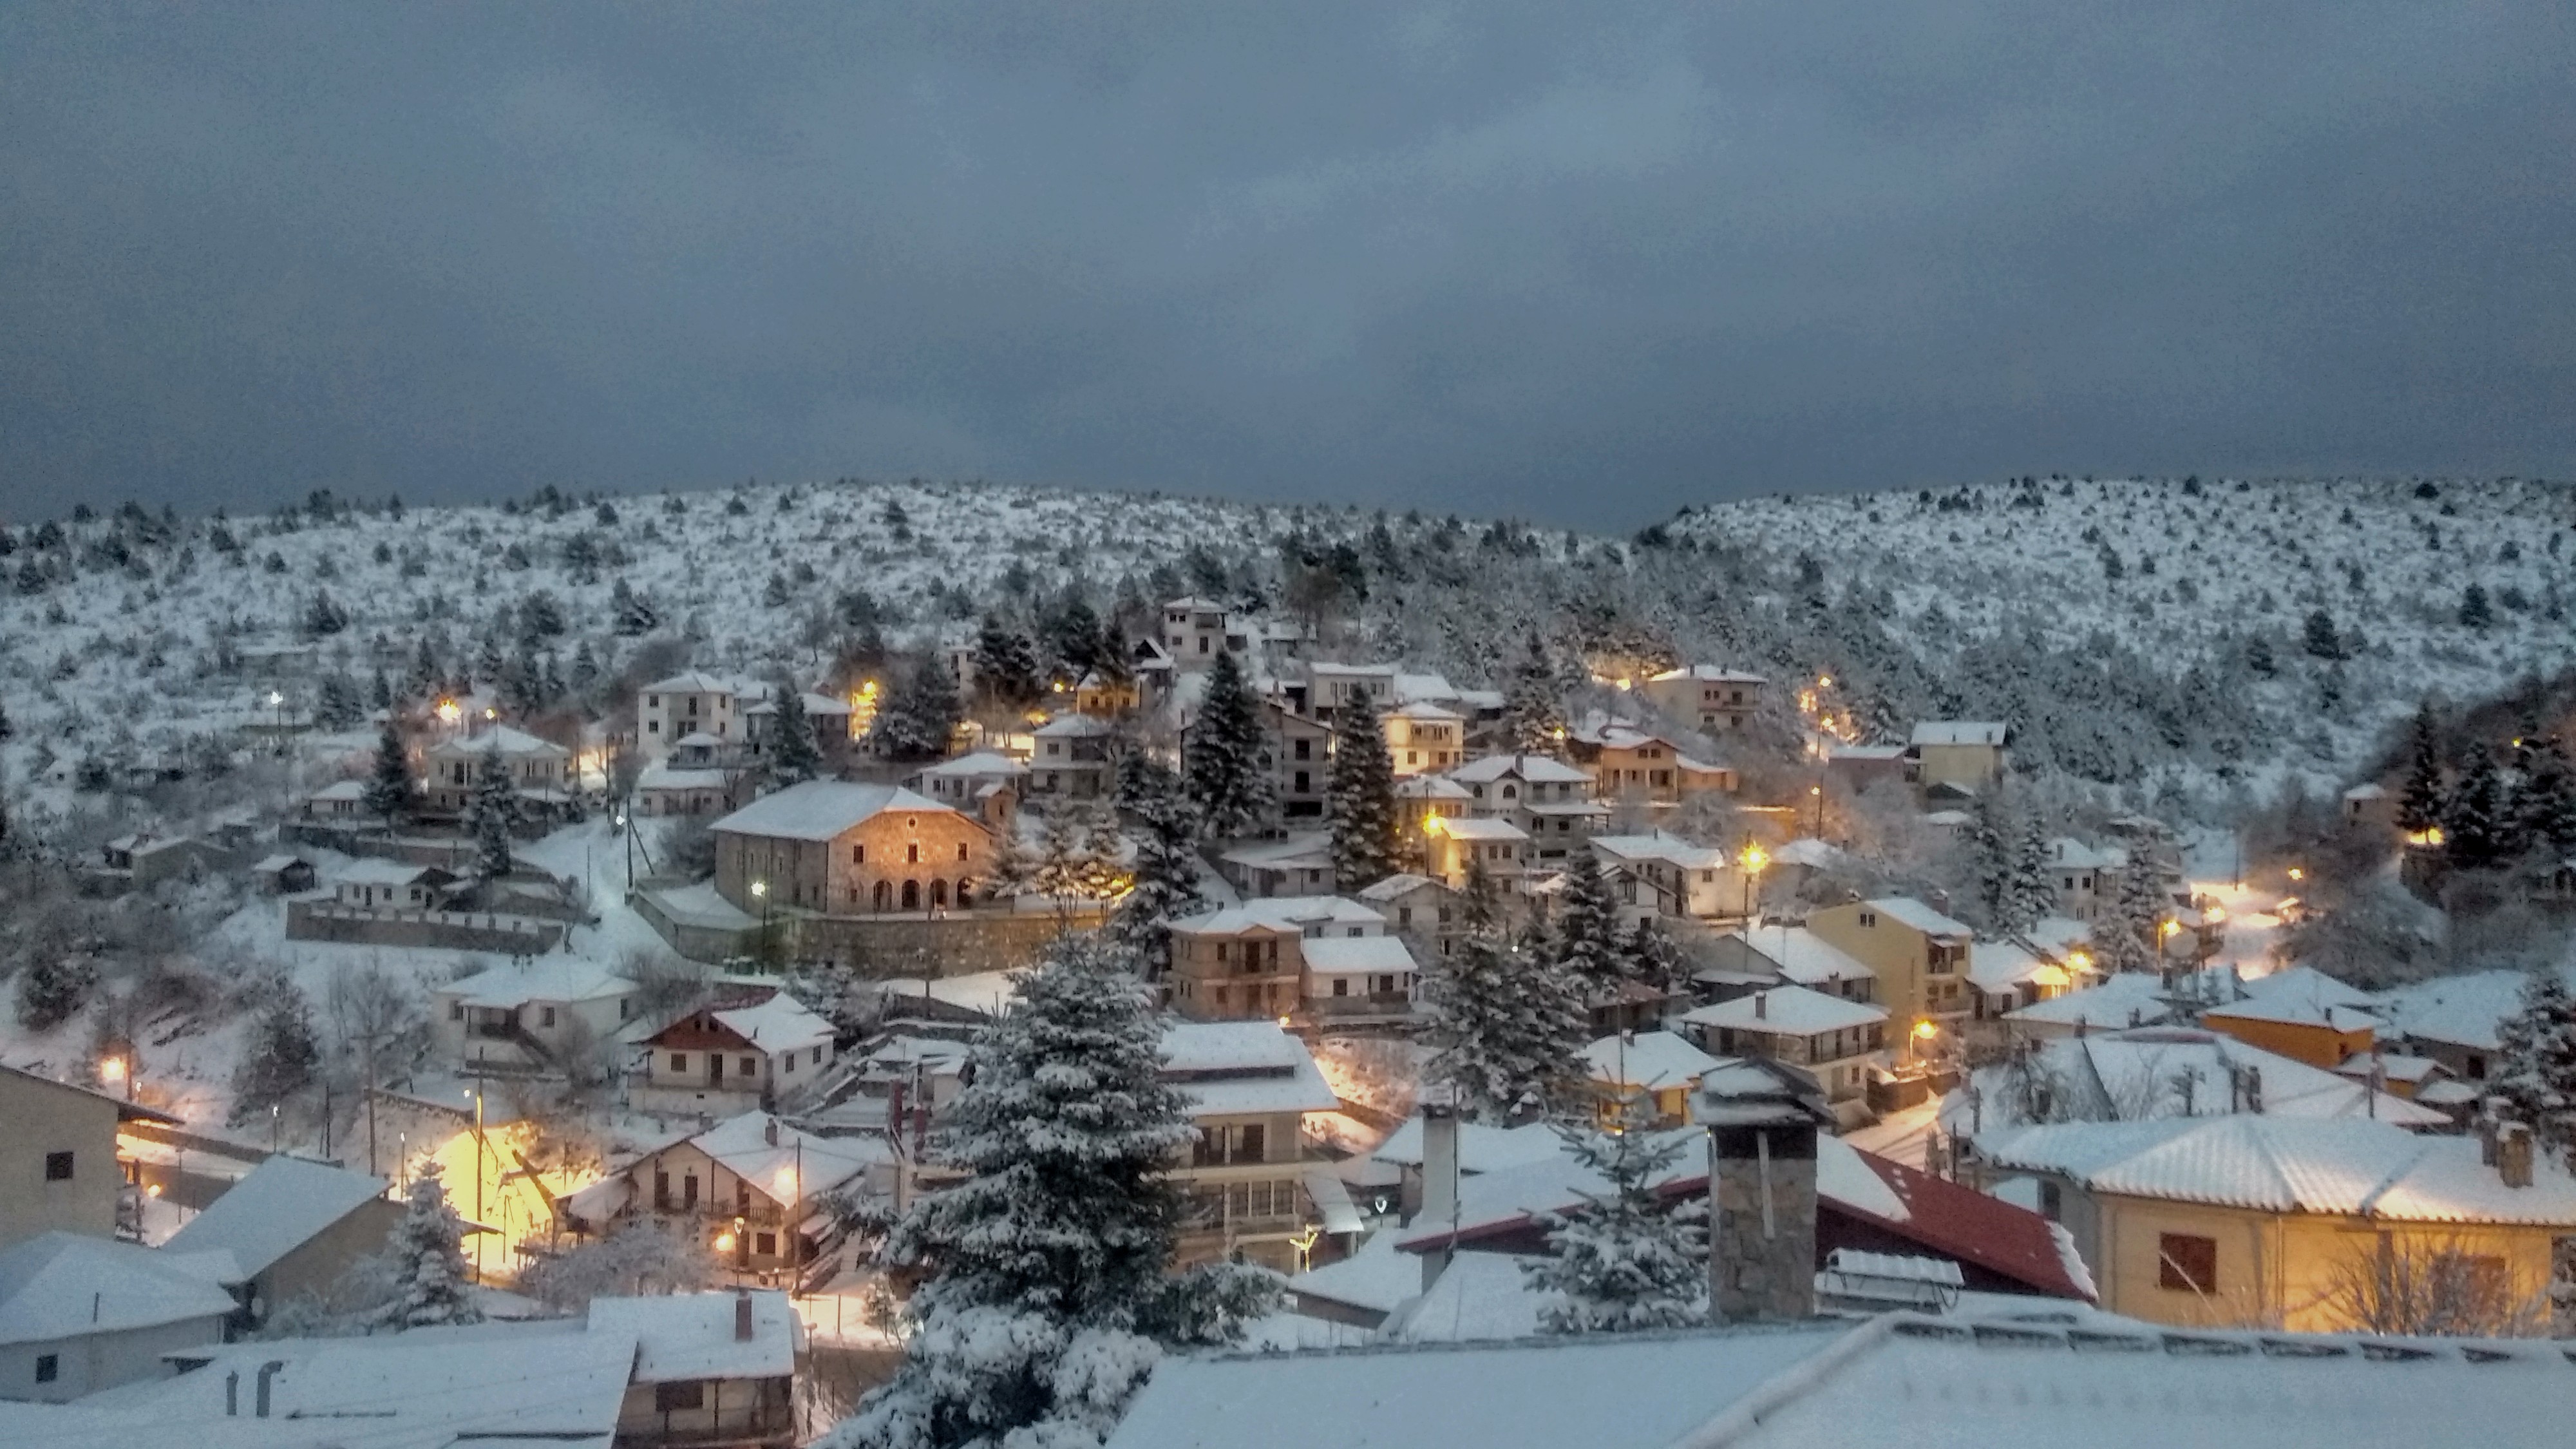 View of the snowy Seli village.